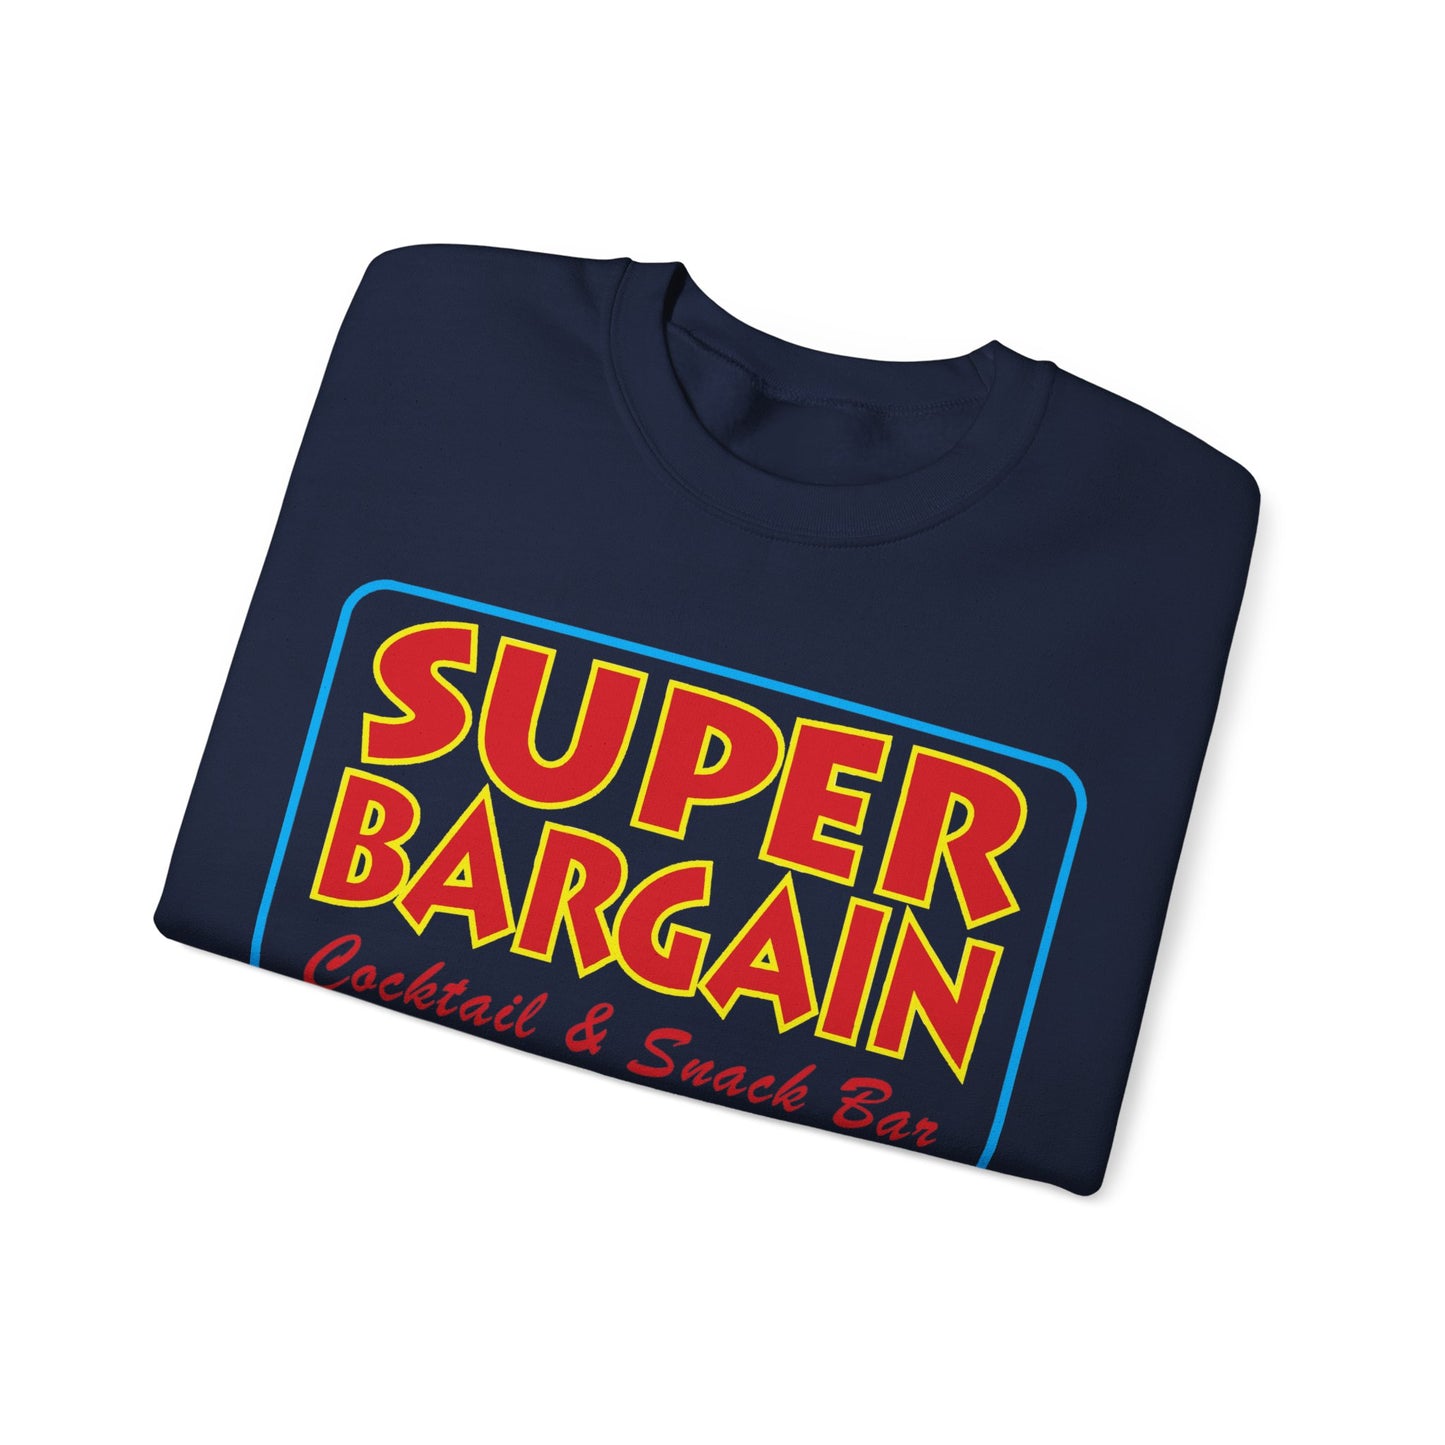 A navy blue Unisex Heavy Blend™ Crewneck Signature Logo Sweatshirt with a colorful graphic that reads "SUPER BARGAIN Cabbagetown Cocktail & Snack Bar" featured on the front, displayed on a plain white background by Printify.